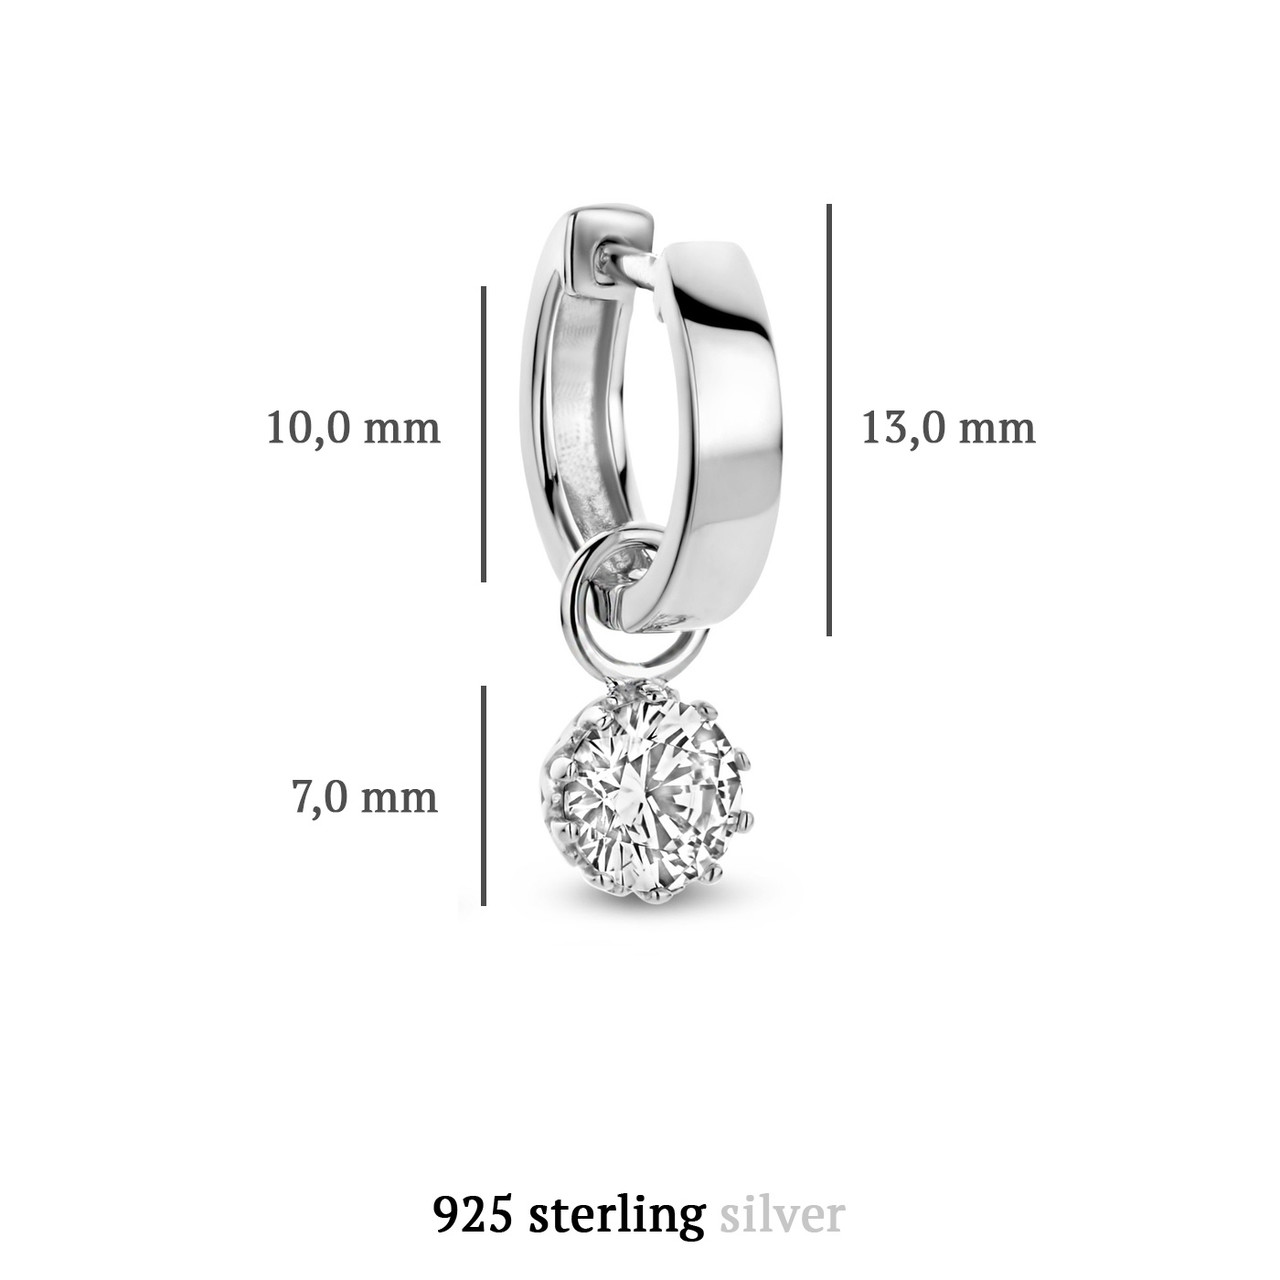 Creolen Parte Me Di - PDM36043 Sterling 925 Silber